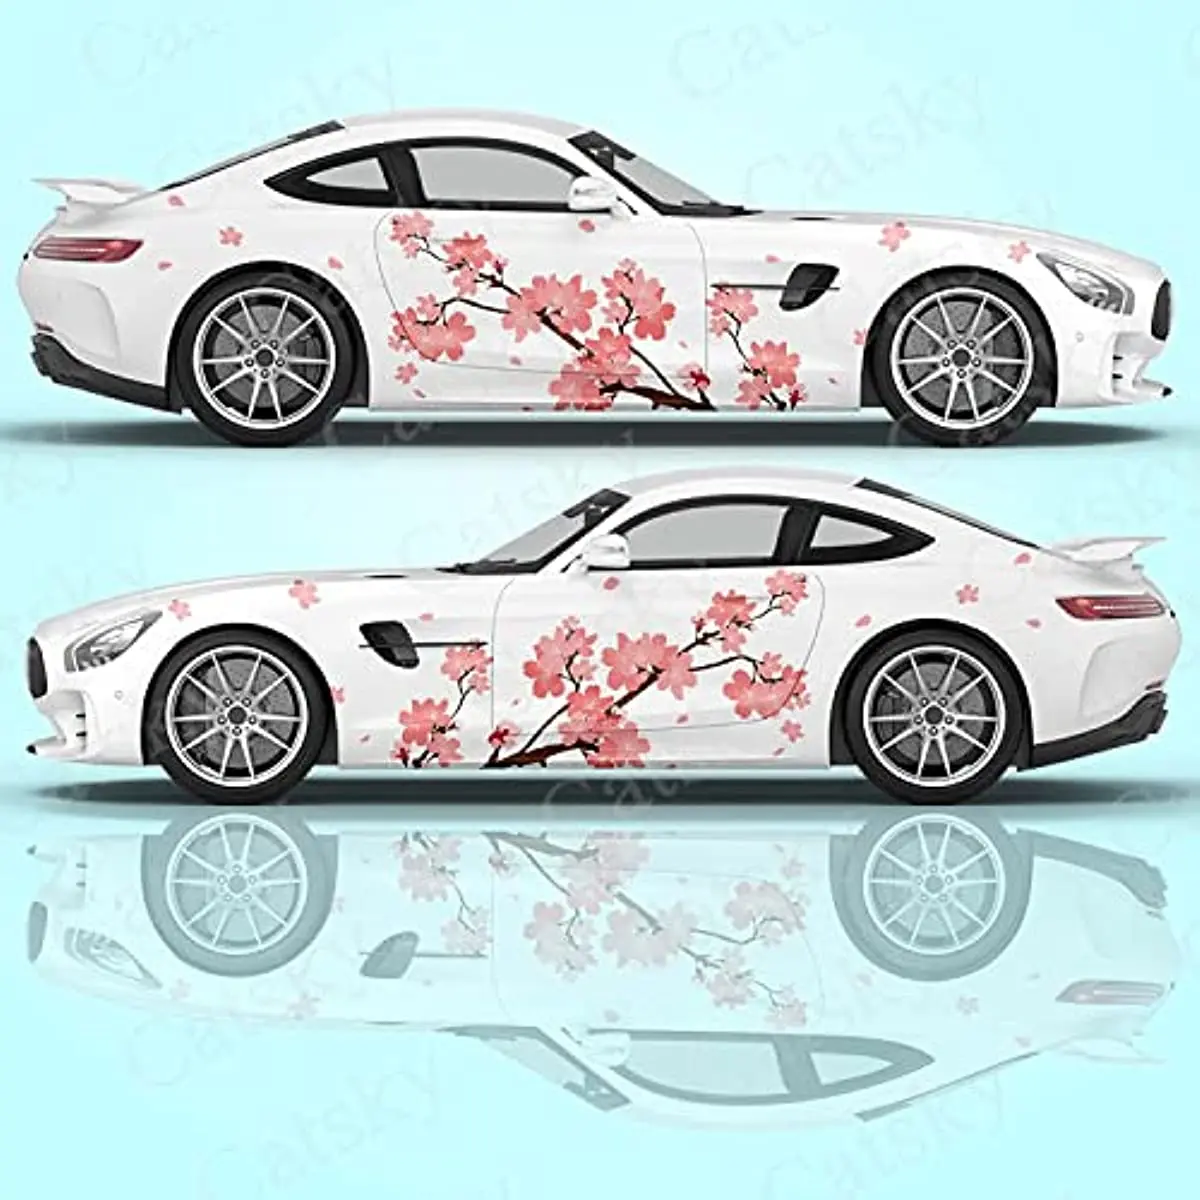 

2PCS Sakura Cherry Blossom Car Livery, Japanese Theme Side Pink Petal Decal Car Body Decals Car Livery Decal(Type7)